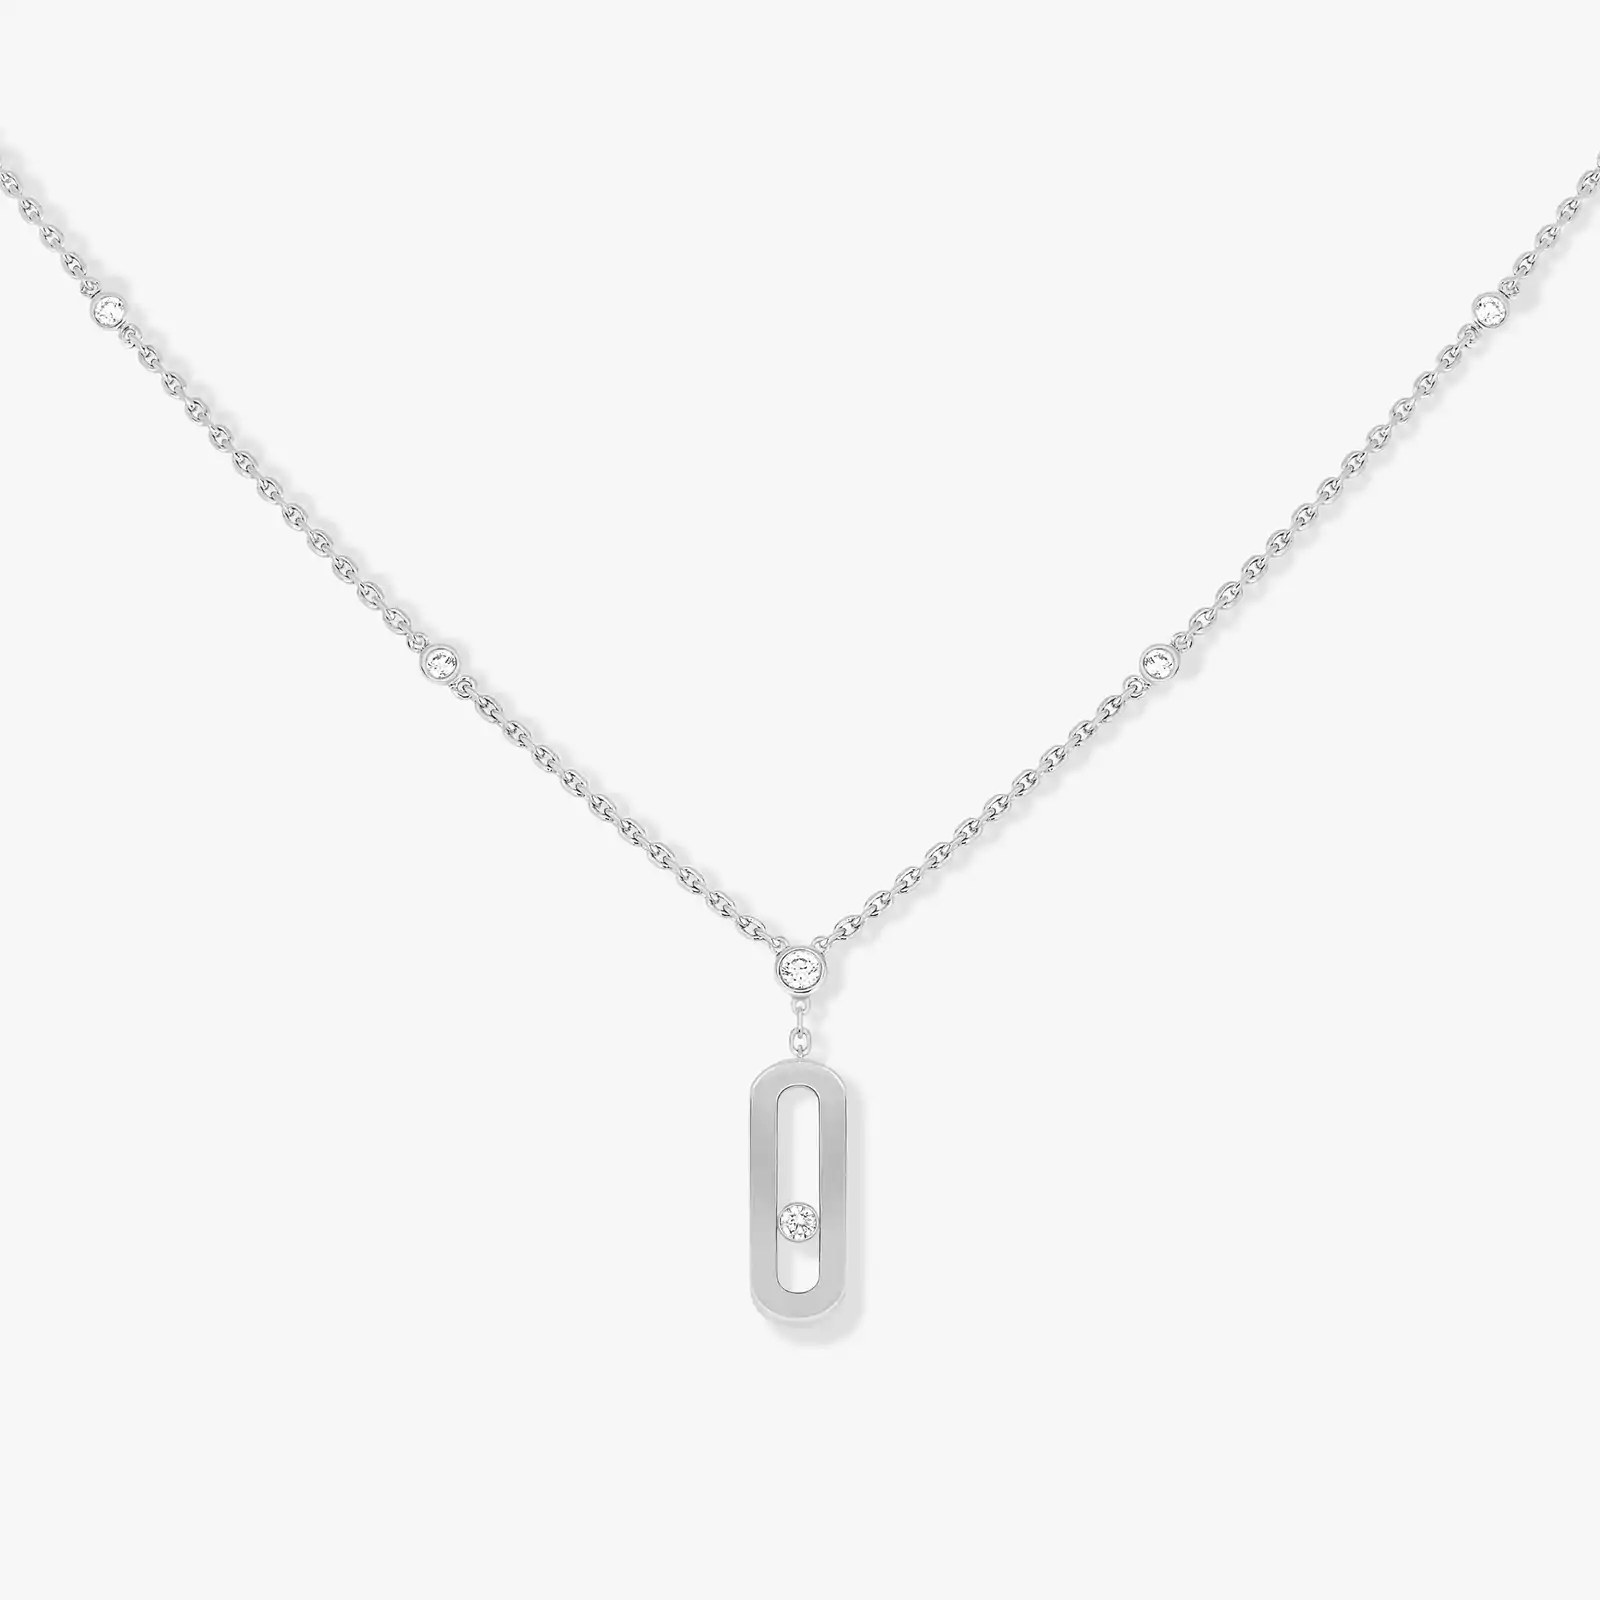 Collier Femme Or Blanc Diamant Collier Long Move Uno 10111-WG